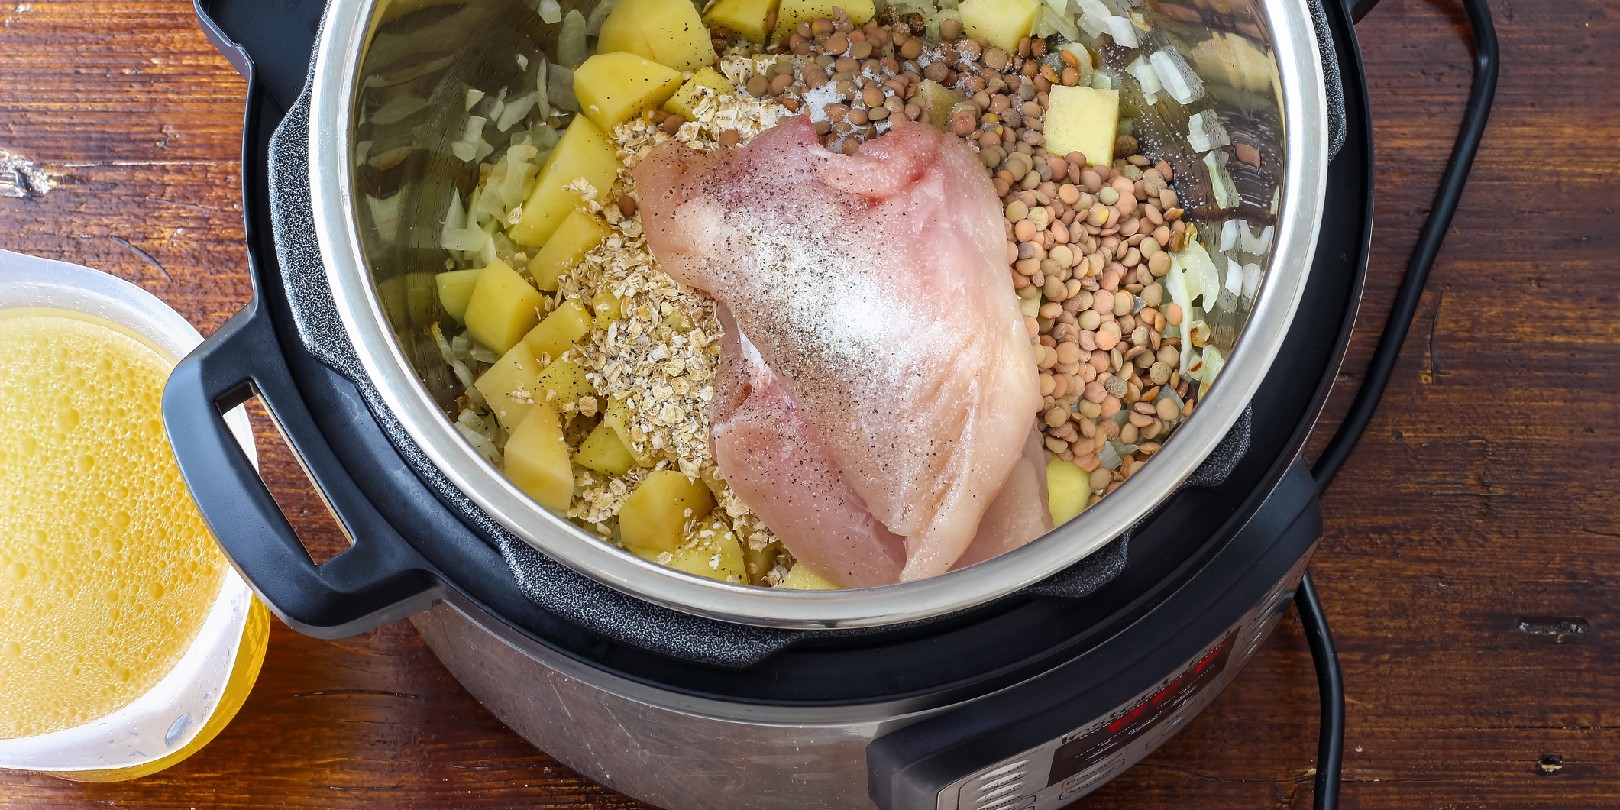 How to Buy the Best Slow Cooker - Brit + Co